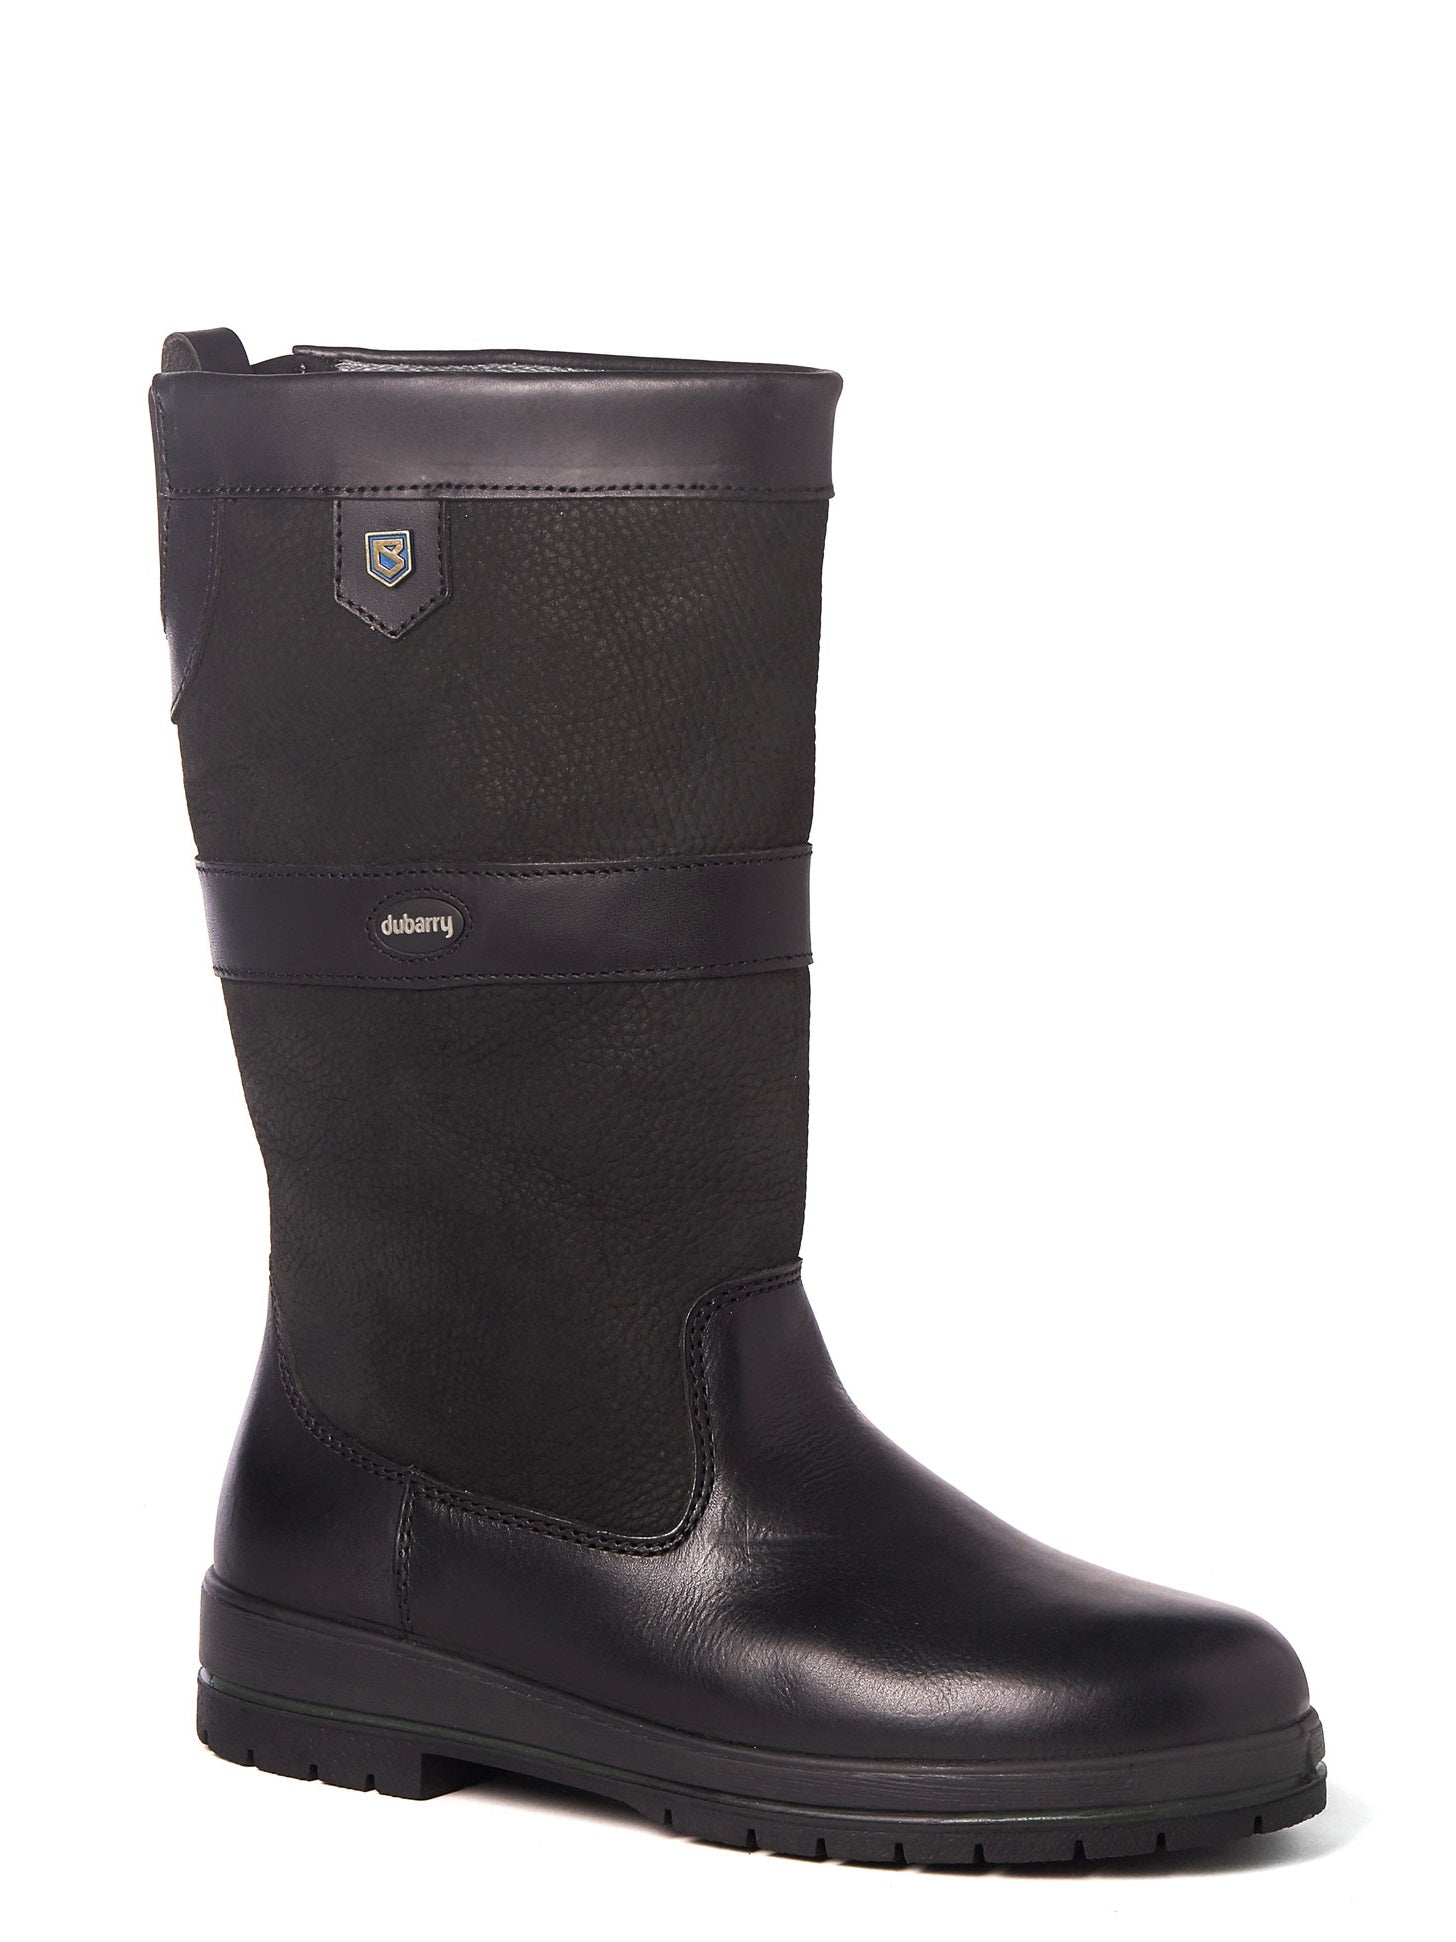 DUBARRY Kildare Leather Boots - Waterproof Gore-Tex Leather - Black